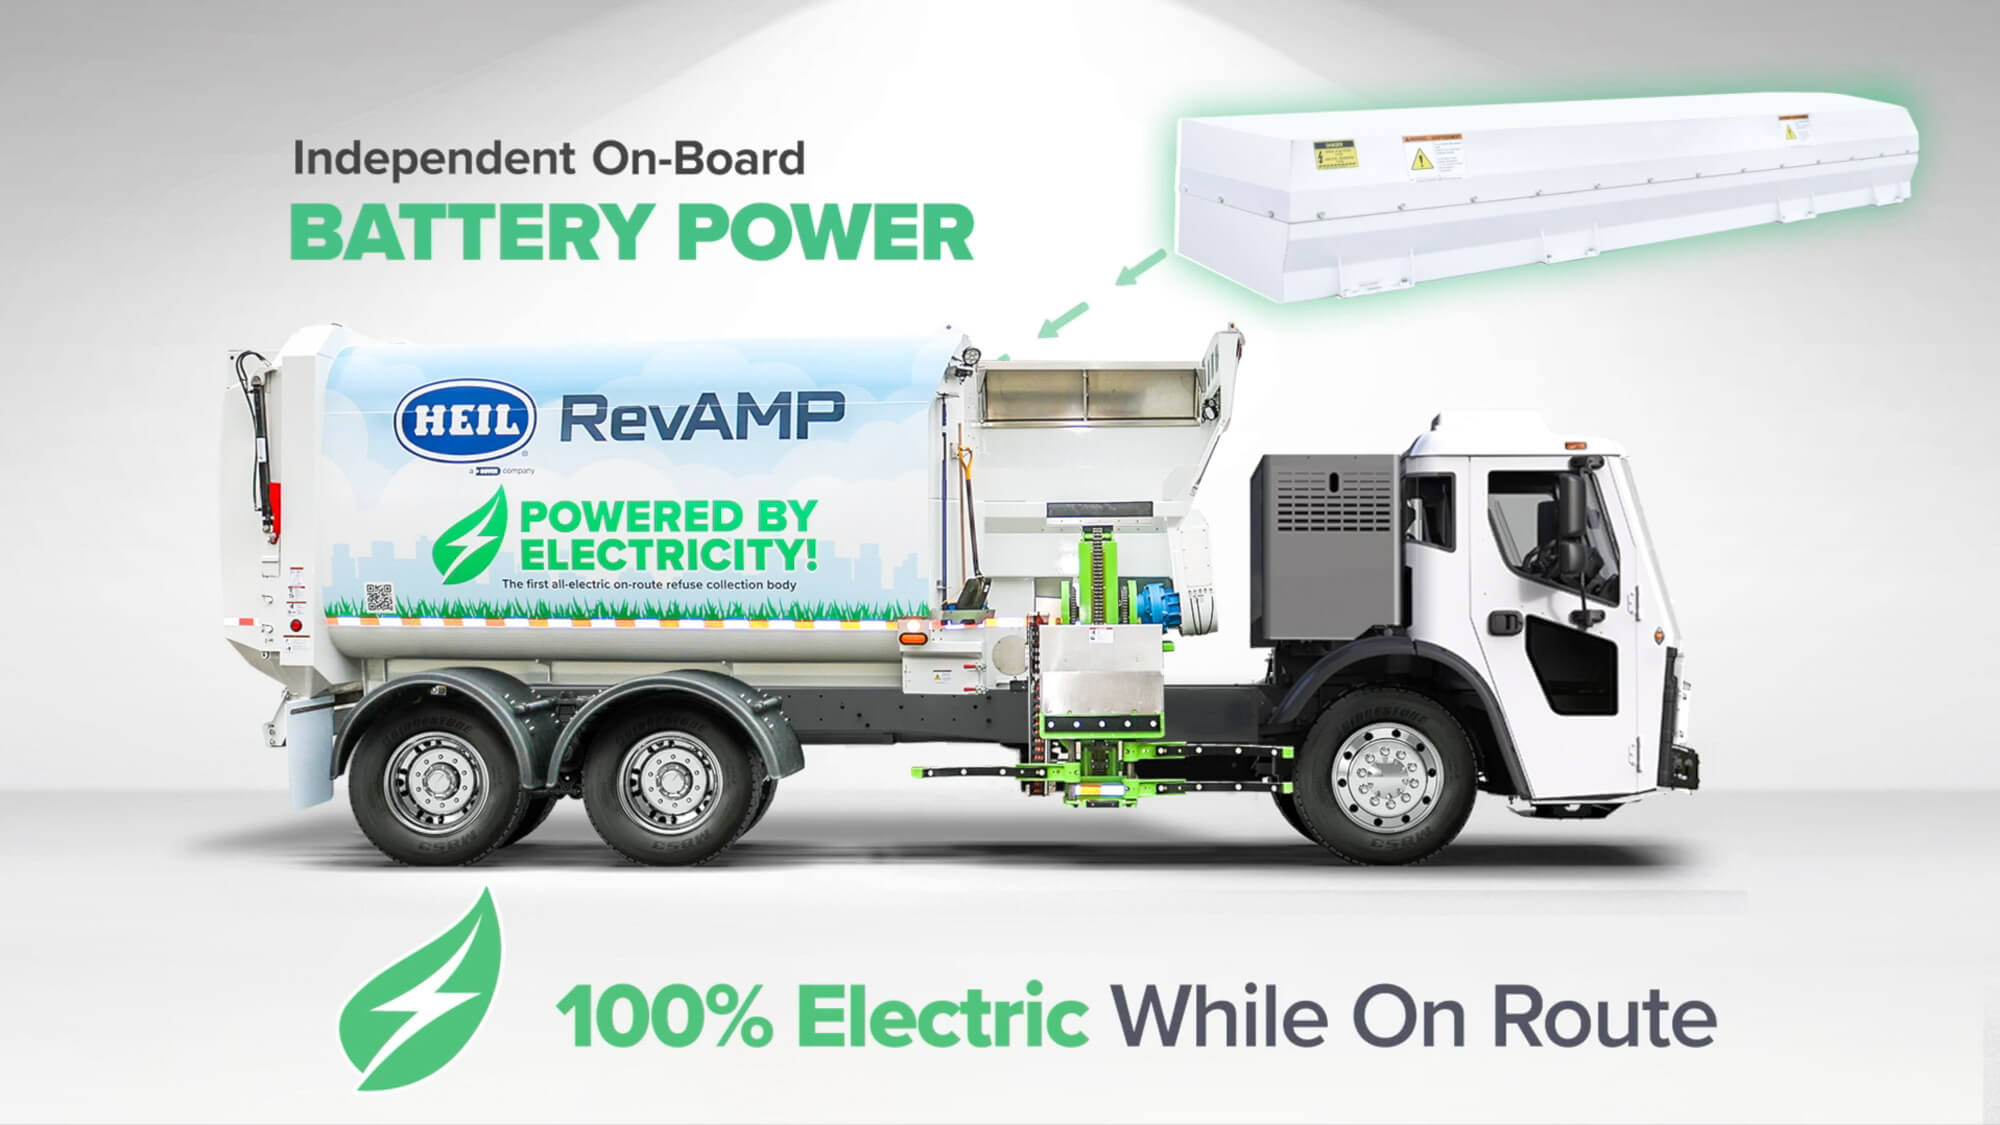 All electric garbage truck with independent battery and no hydraulics